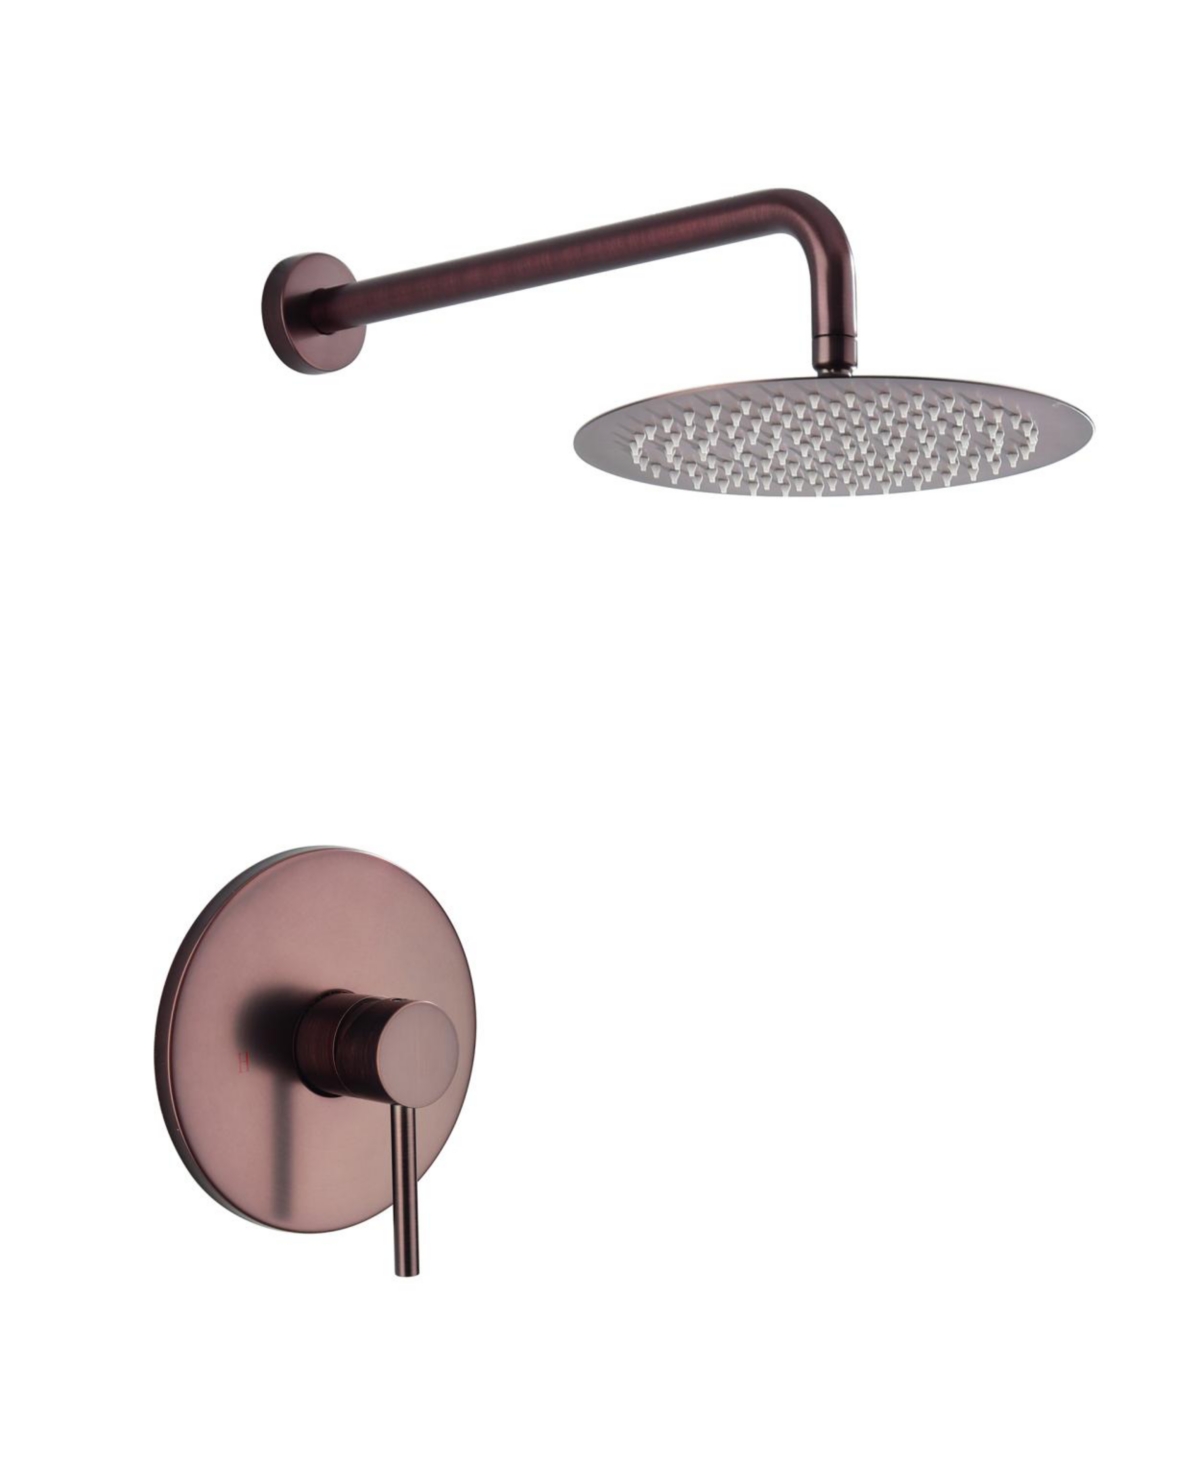 Complete Shower System With Rough-In Valve 004 - Brown